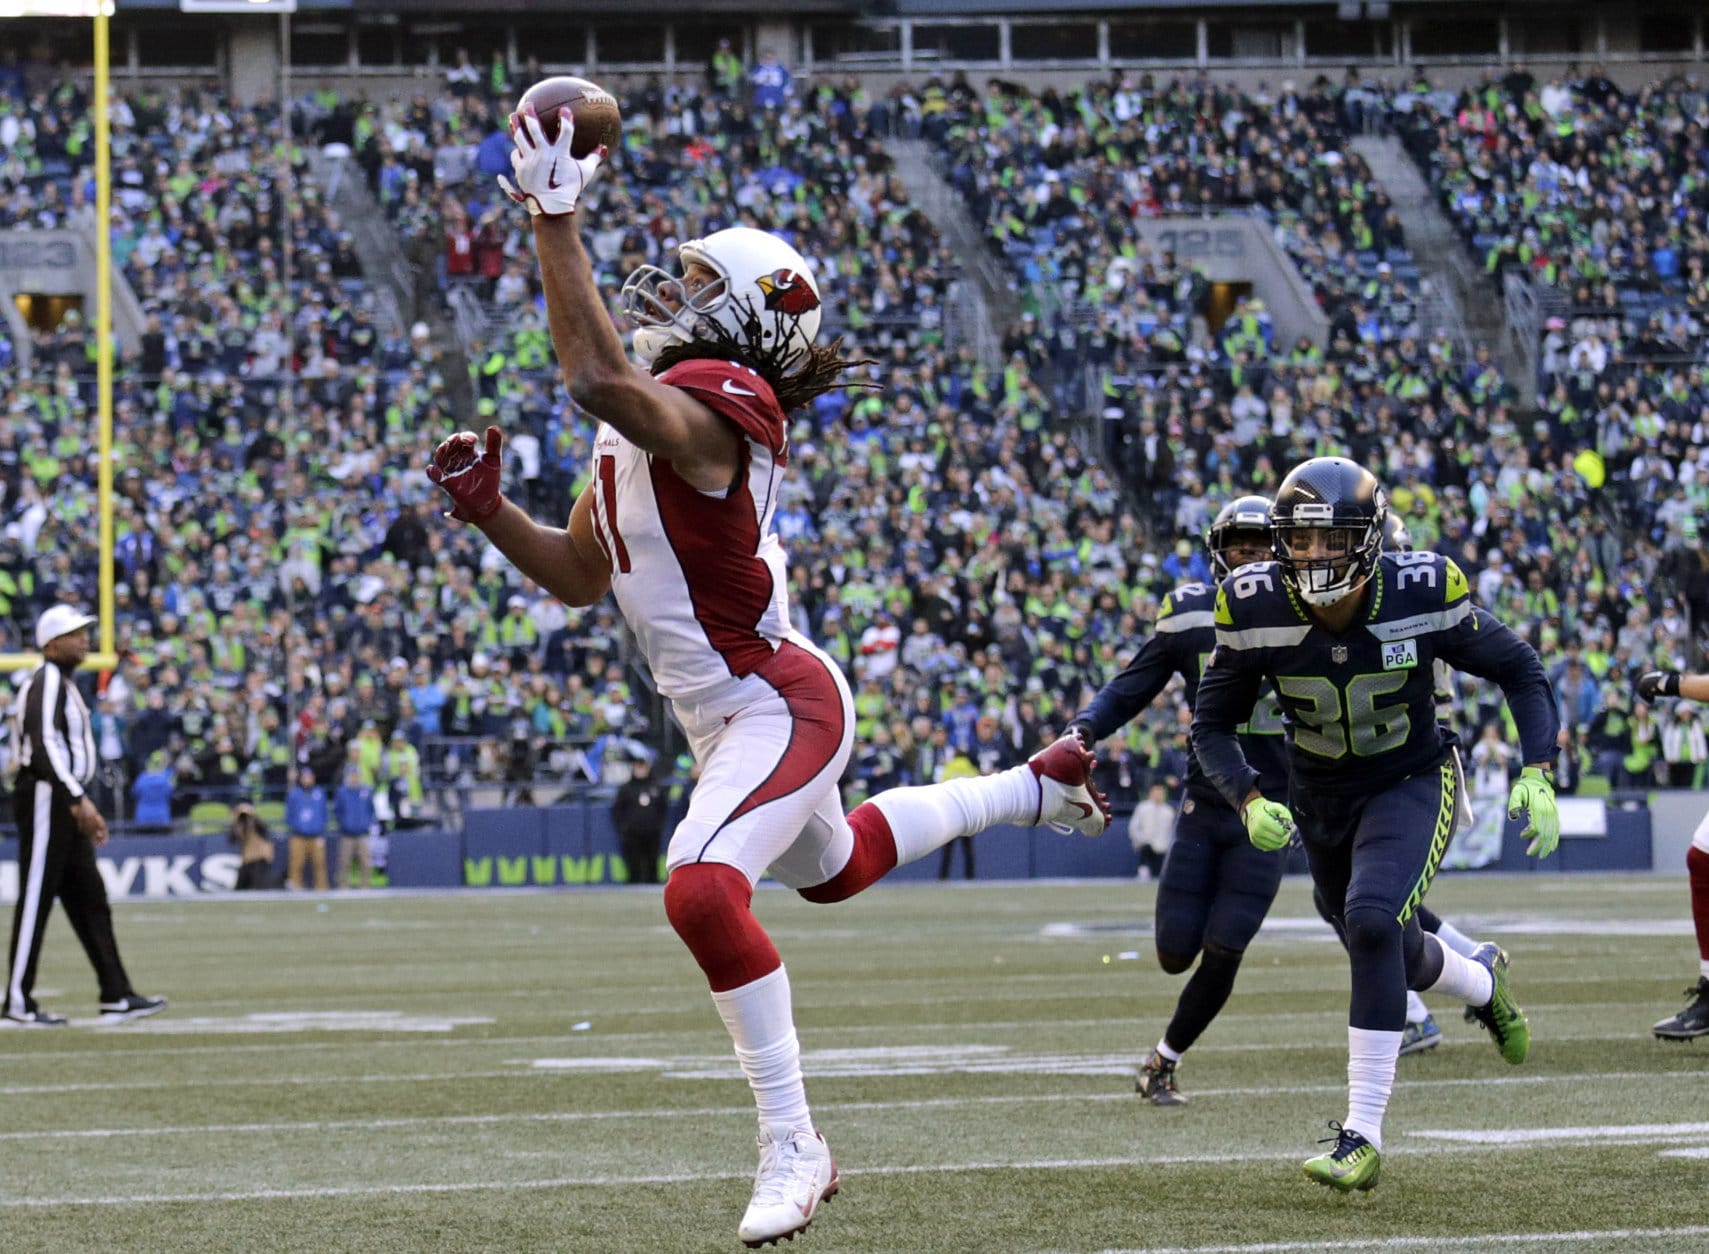 Arizona Cardinals' Larry Fitzgerald, left, snags a one-handed touchdown pass against the Seattle Seahawks during the first half of an NFL football game, Sunday, Dec. 30, 2018, in Seattle. (AP Photo/John Froschauer)